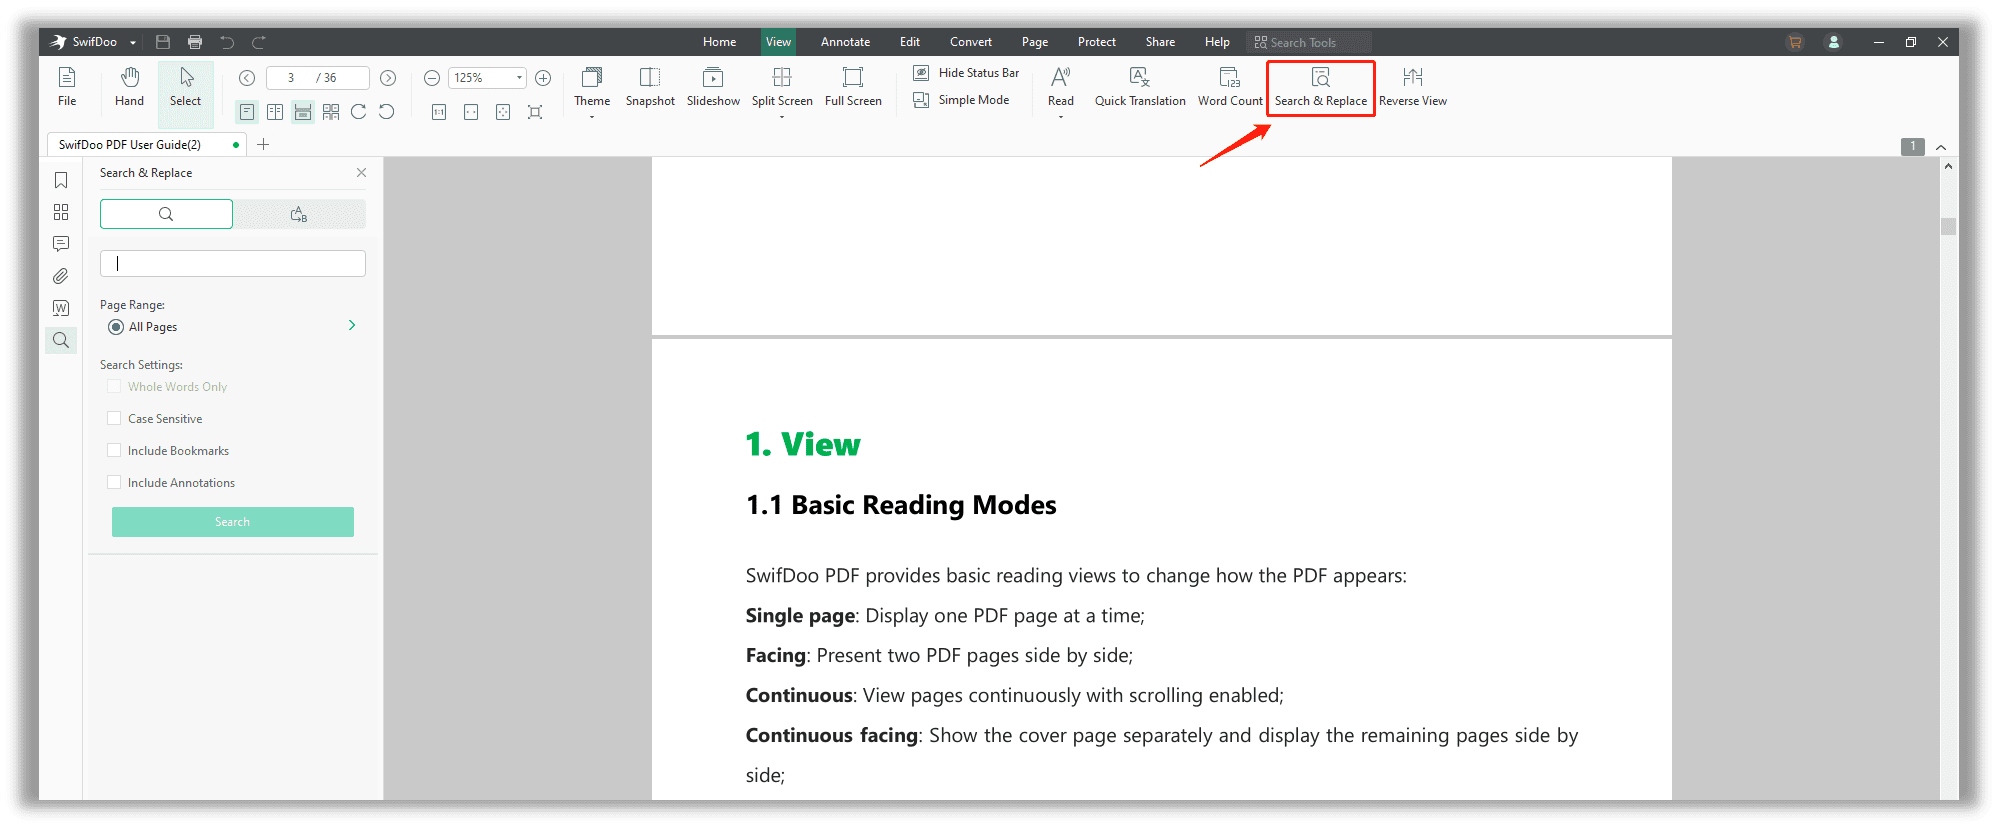 How to search a PDF in SwifDoo PDF